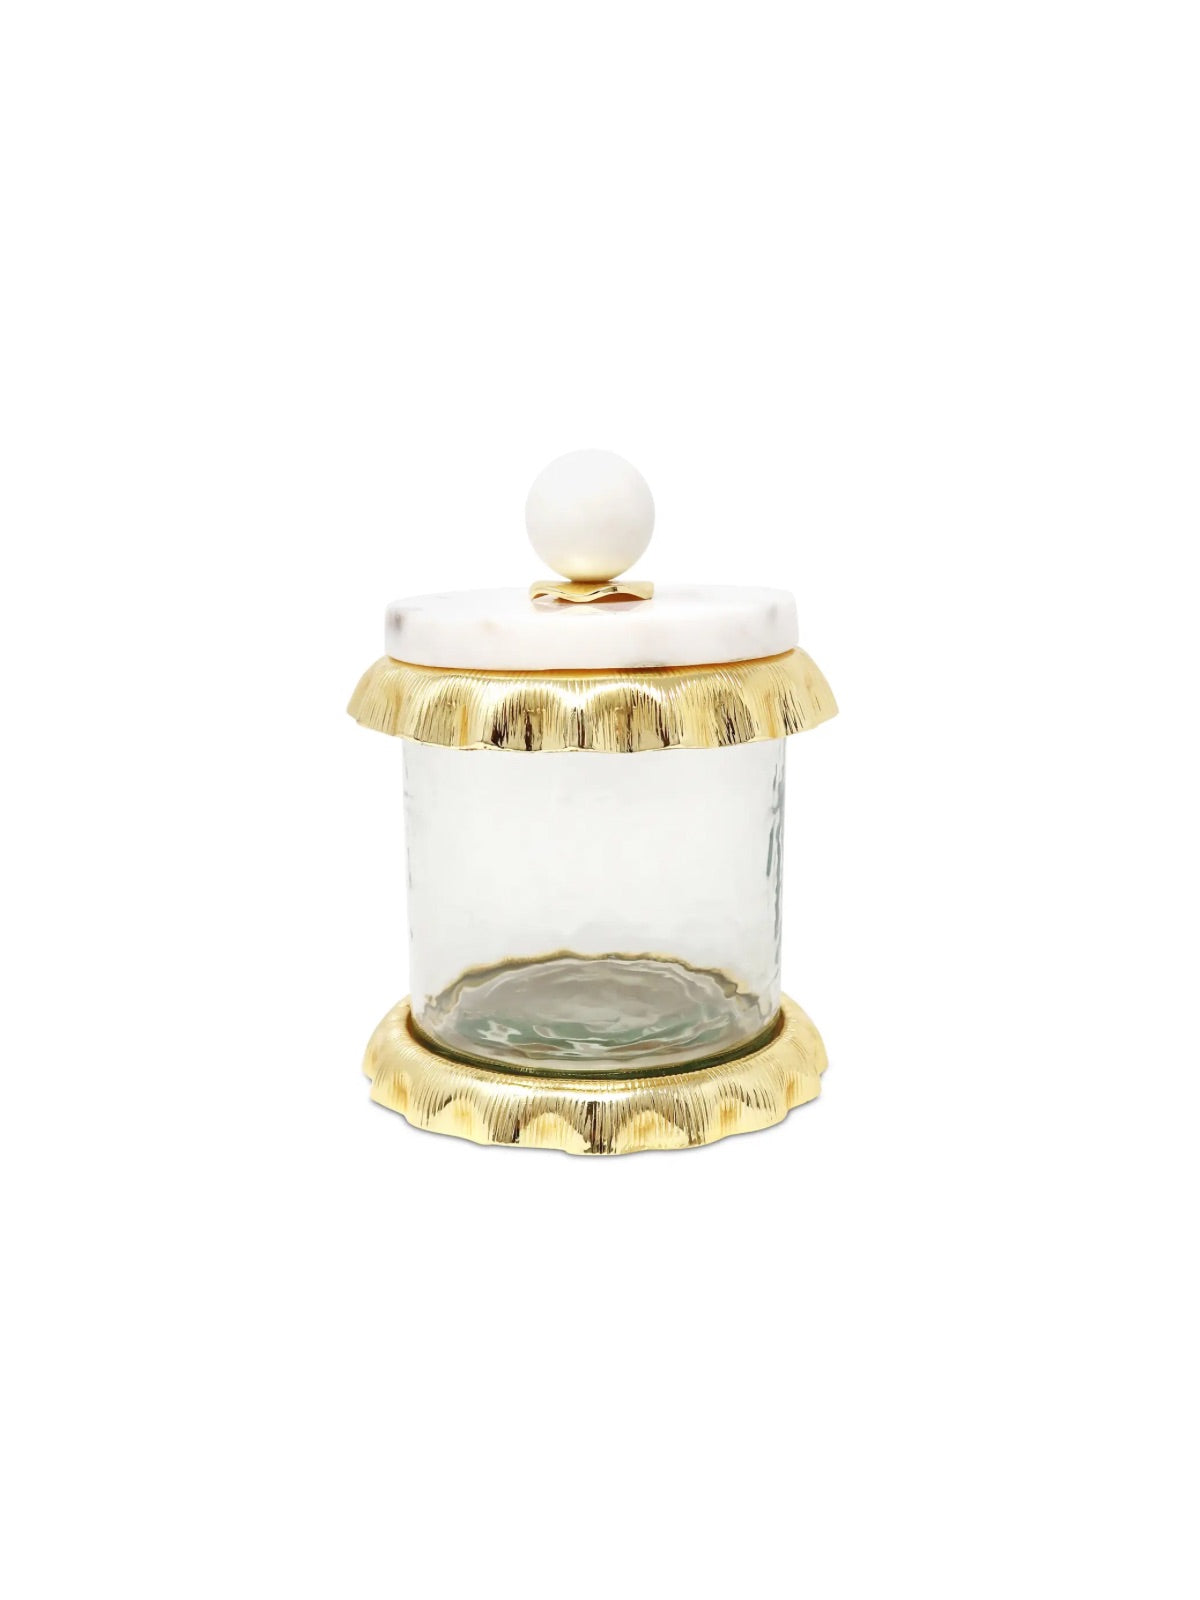 Hammered Glass Canister with Gold Ruffle and Marble Lid in Small Size – Aesthetic and Versatile Home Decor Storage Solution.